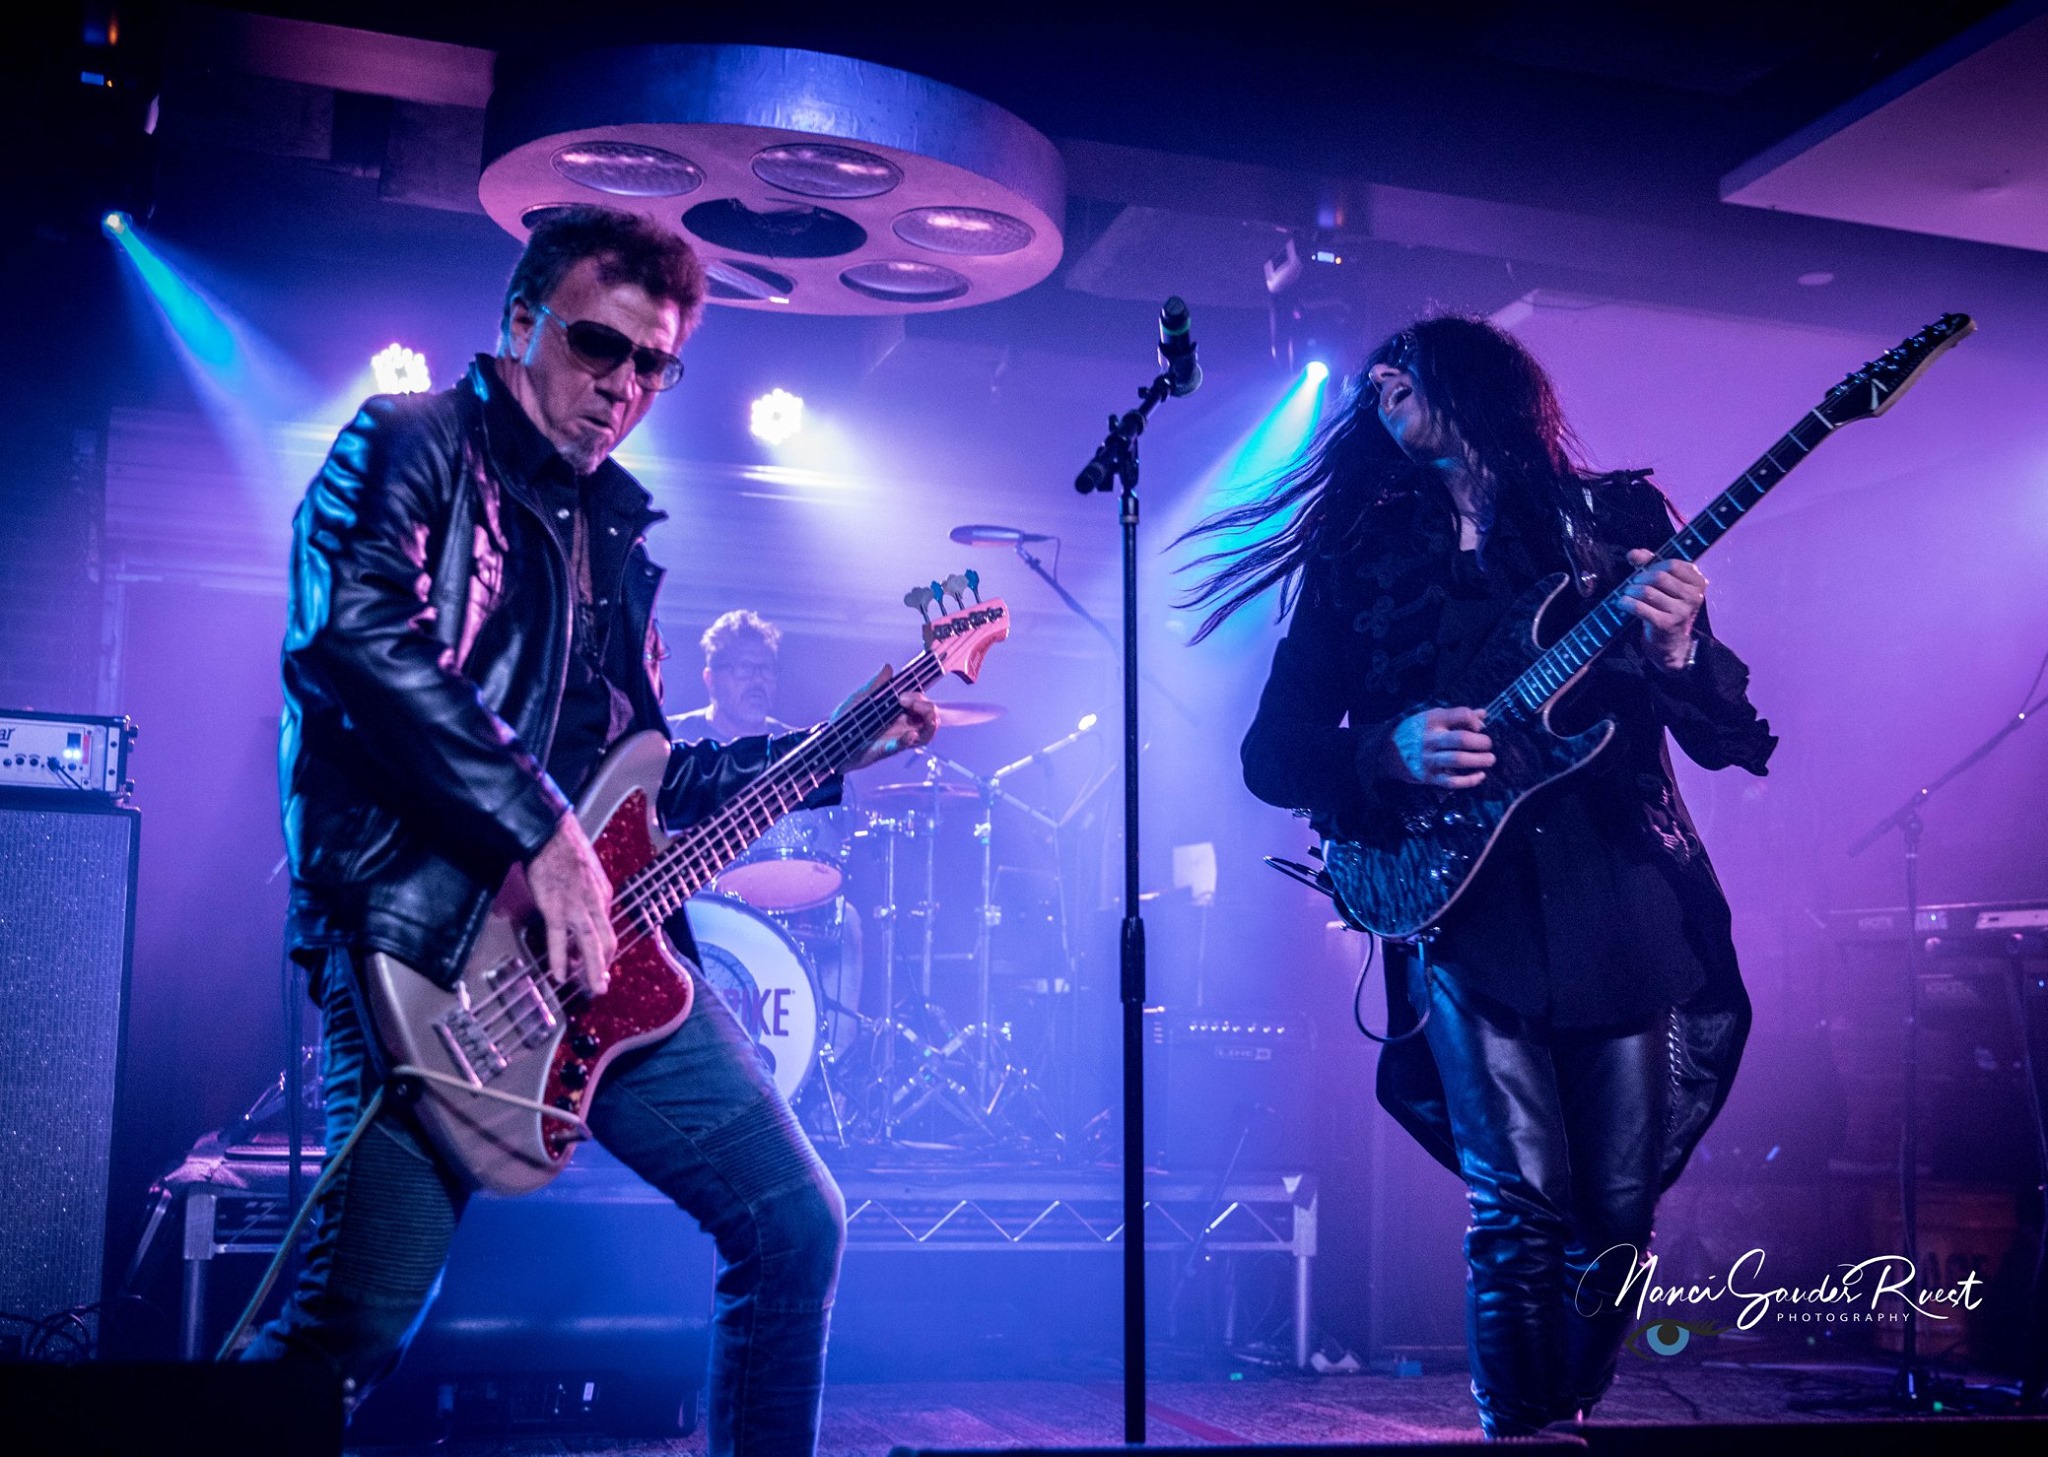 Mike Campese Soundcheck Live, Pic 4 by Nanci Sauder Ruest.